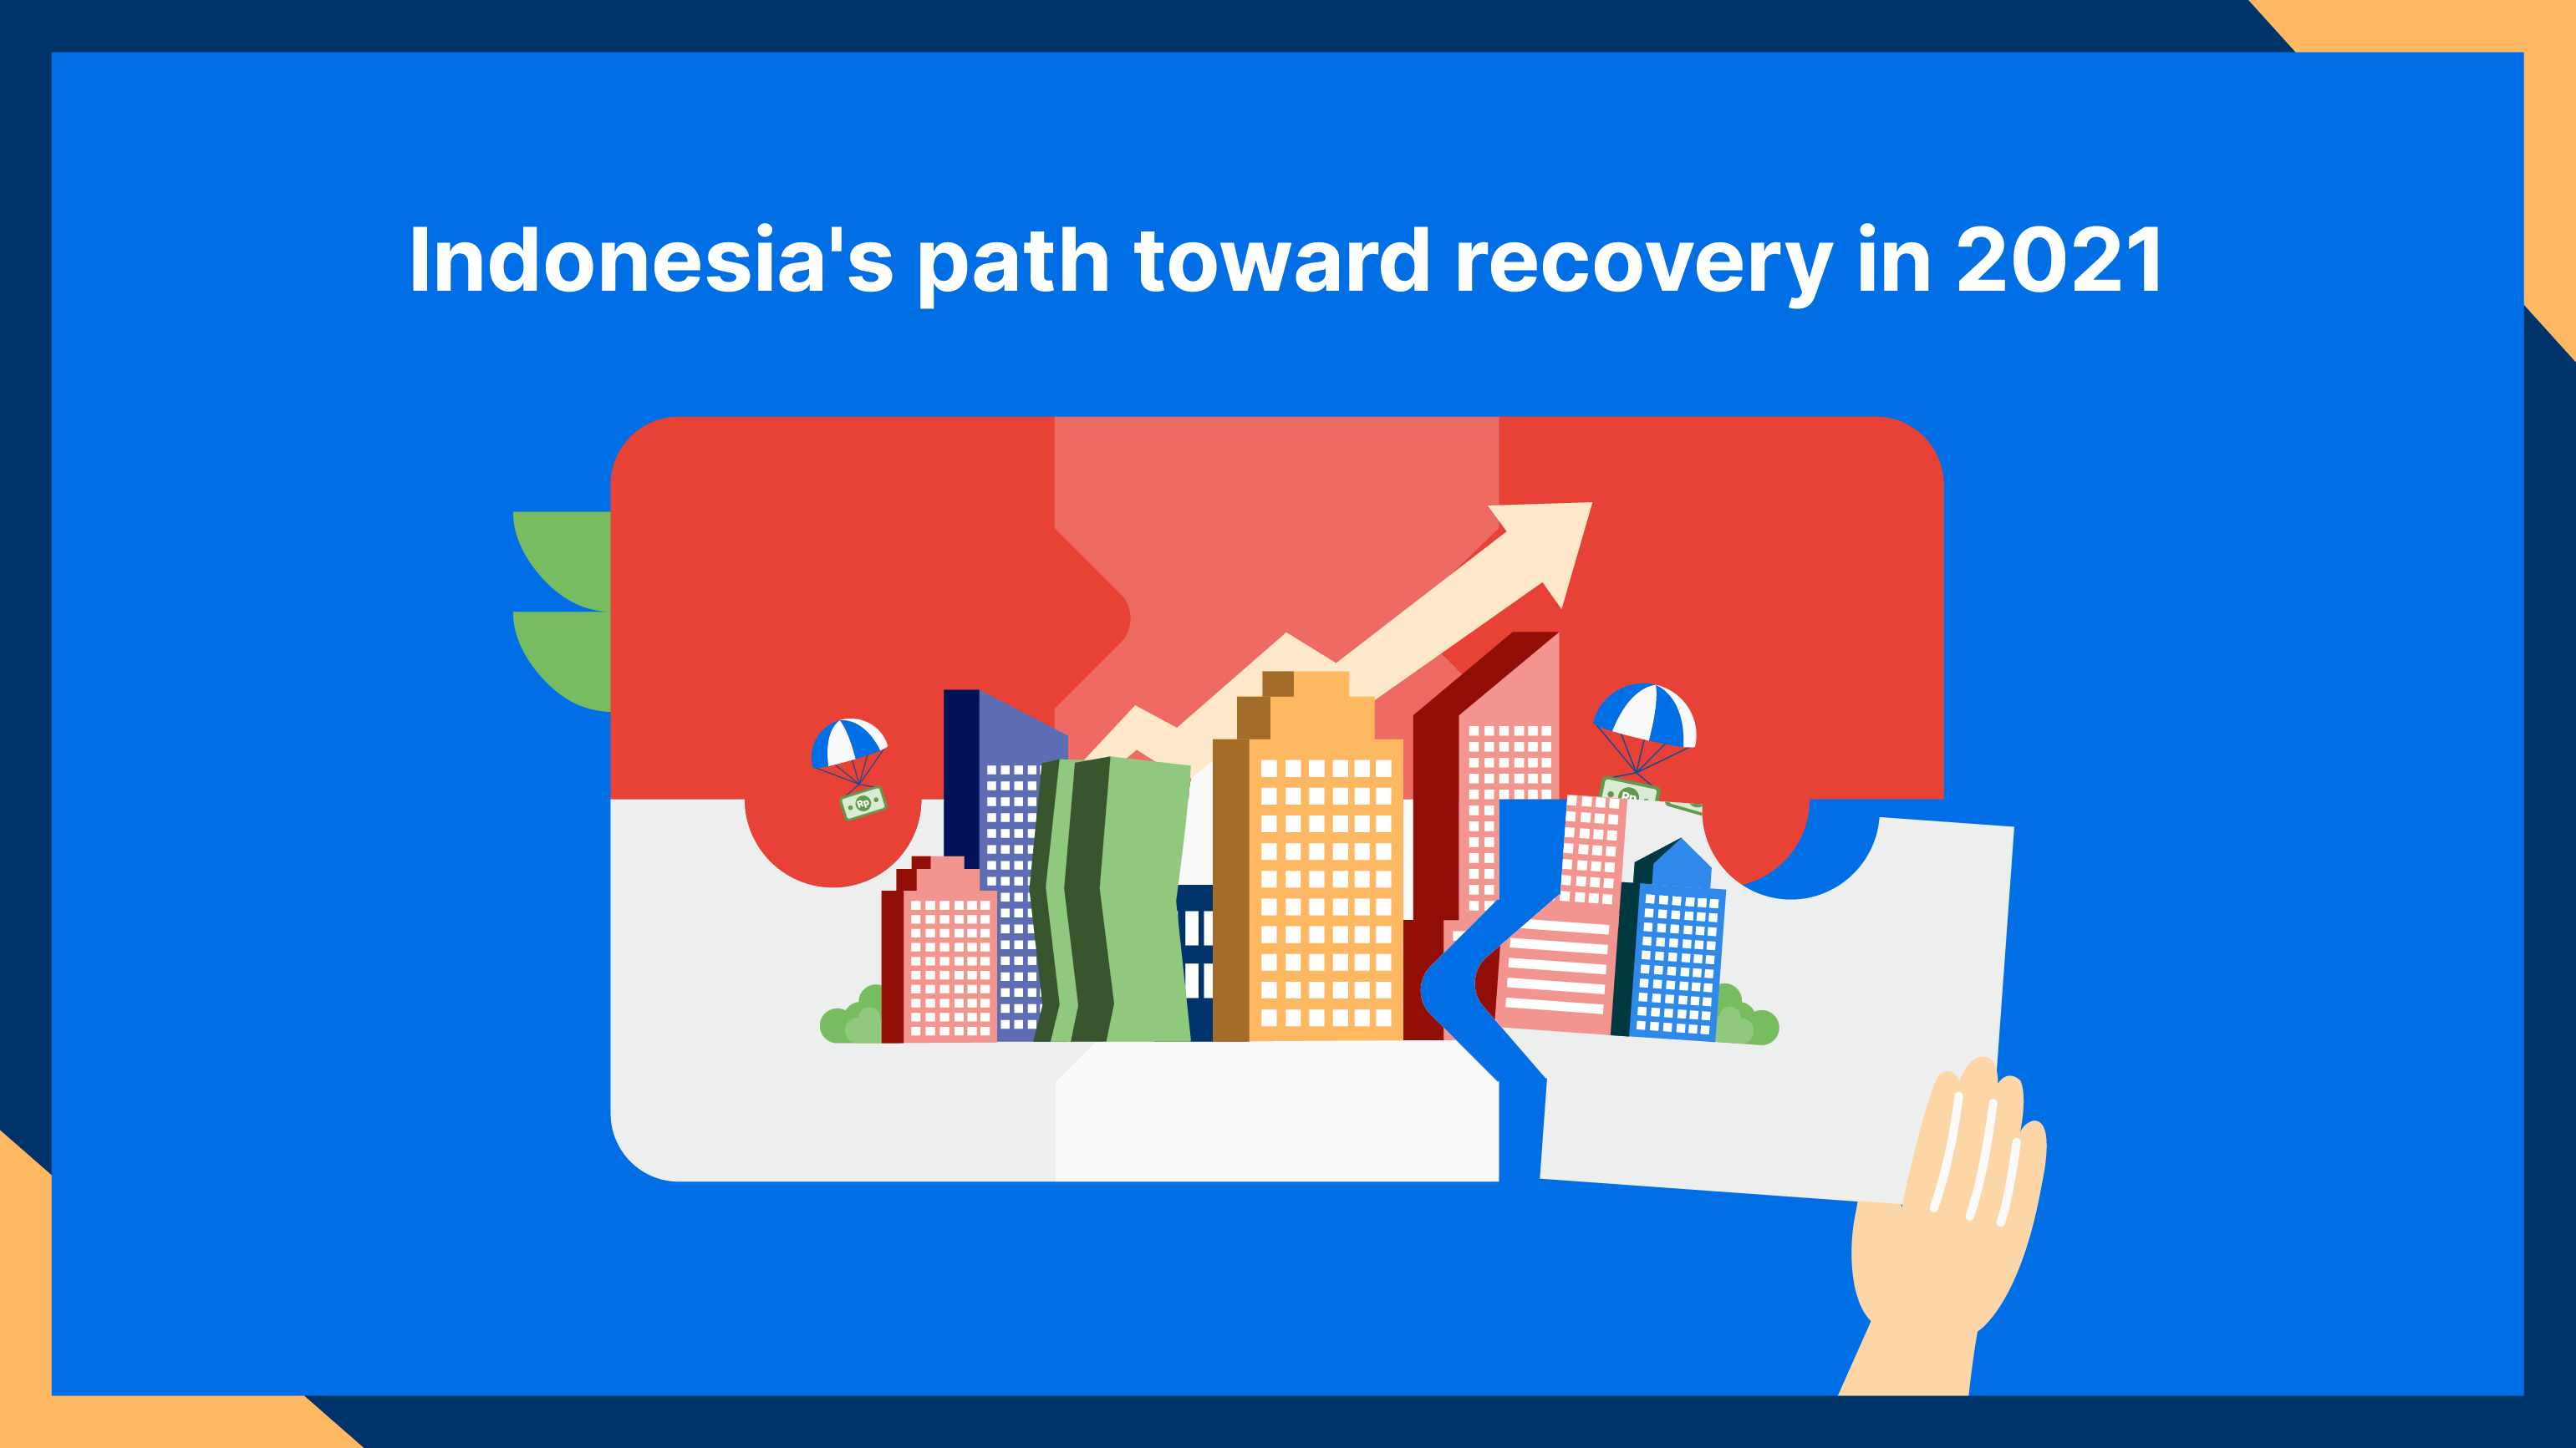 With people banking on 2021 to be the year of recovery, many officials from the Indonesian government have stated several factors that could help the country recover from the COVID-19 pandemic